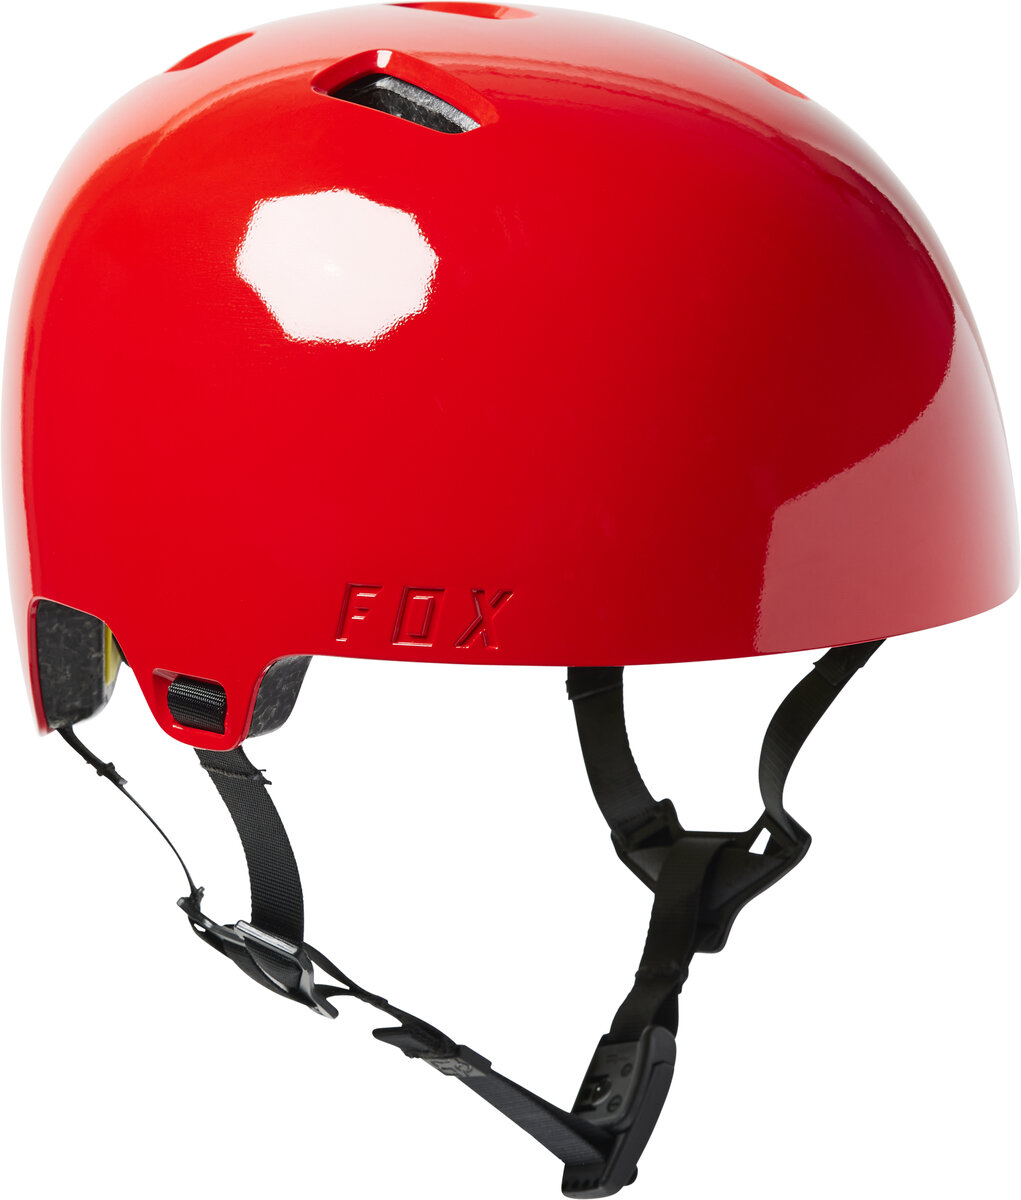 Fox Racing Youth Flight Pro Helmet Wheel World Bike Shops - Road Bikes, Mountain Bikes, Bicycle Parts and Accessories. Parts & Bike Closeouts!